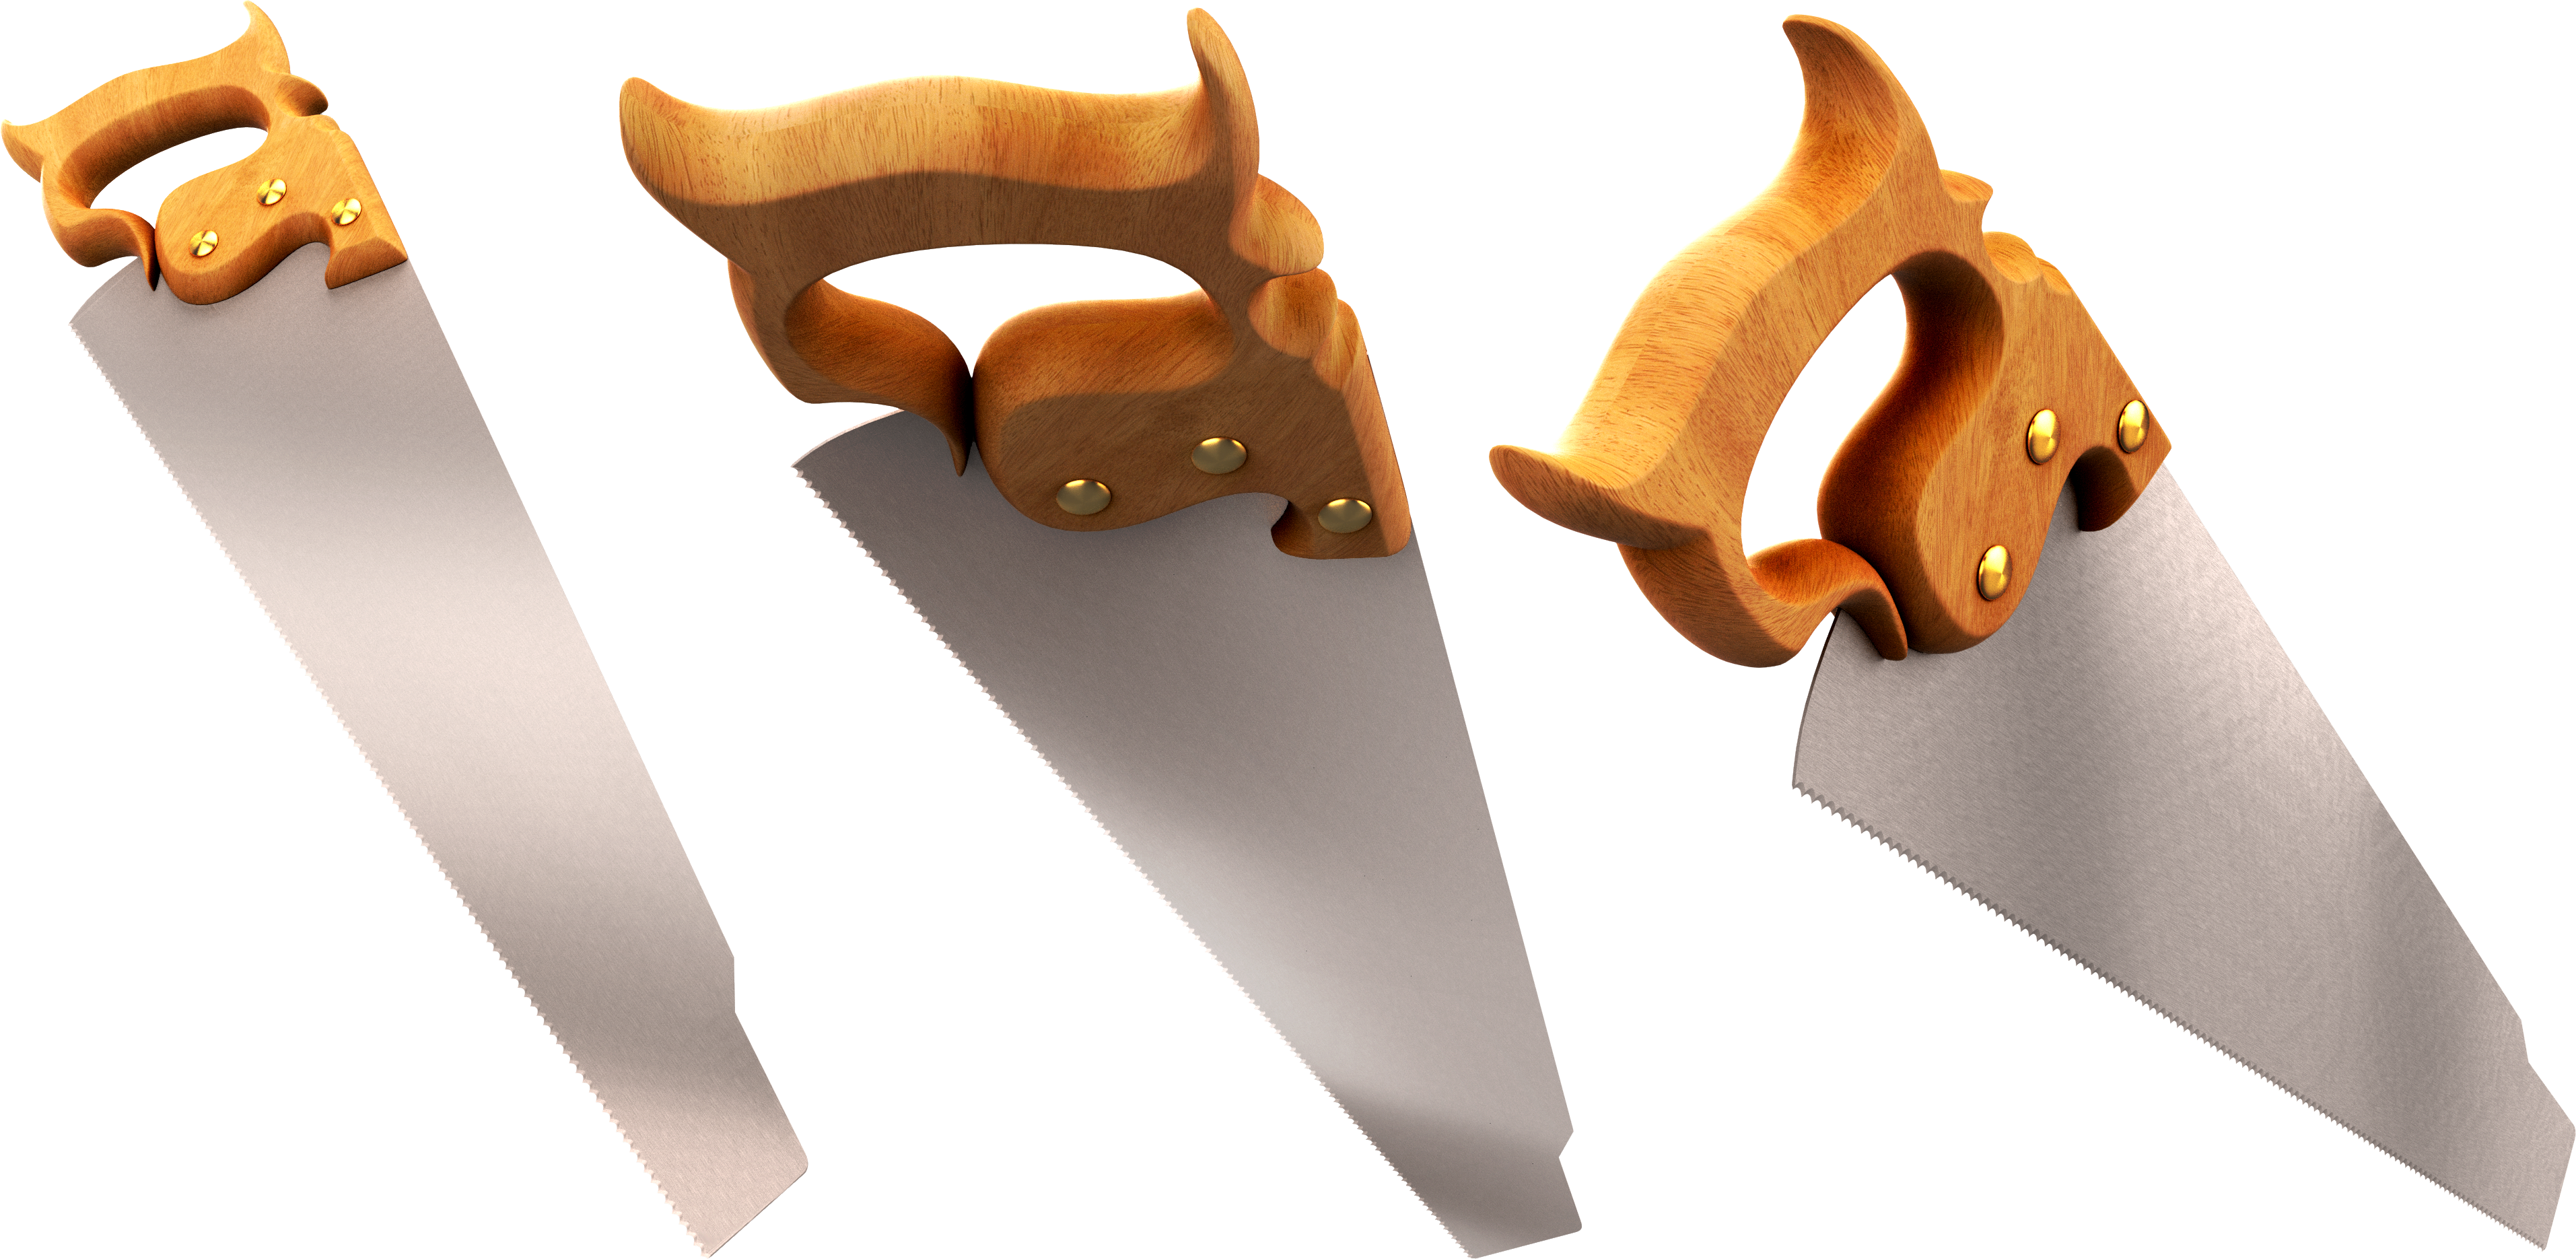 Hand saw PNG